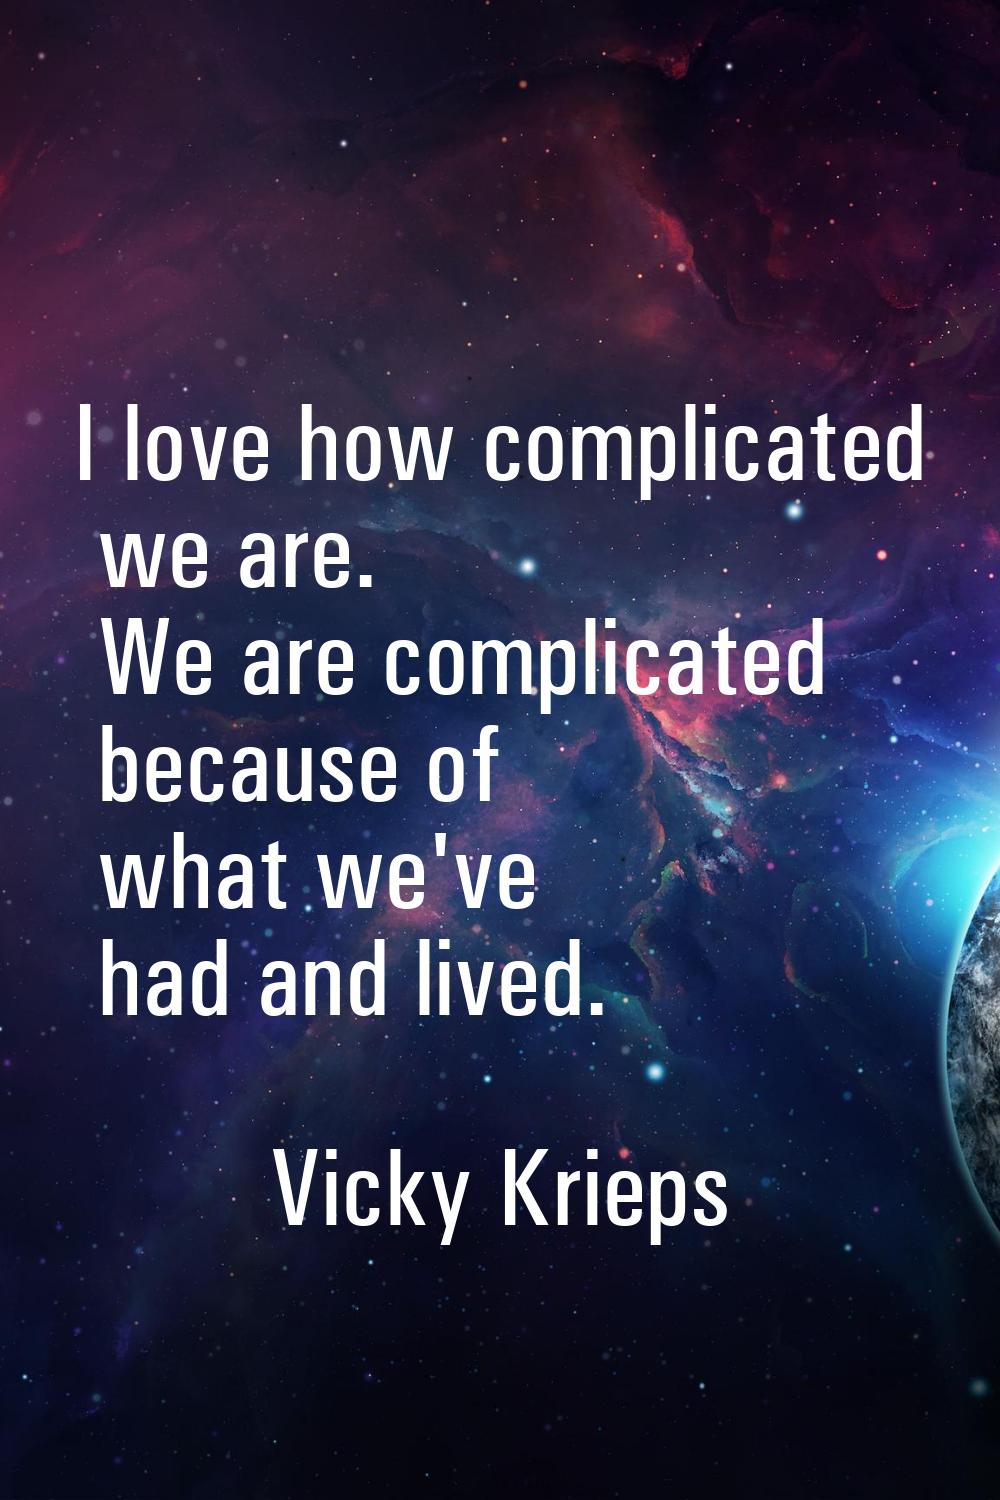 I love how complicated we are. We are complicated because of what we've had and lived.